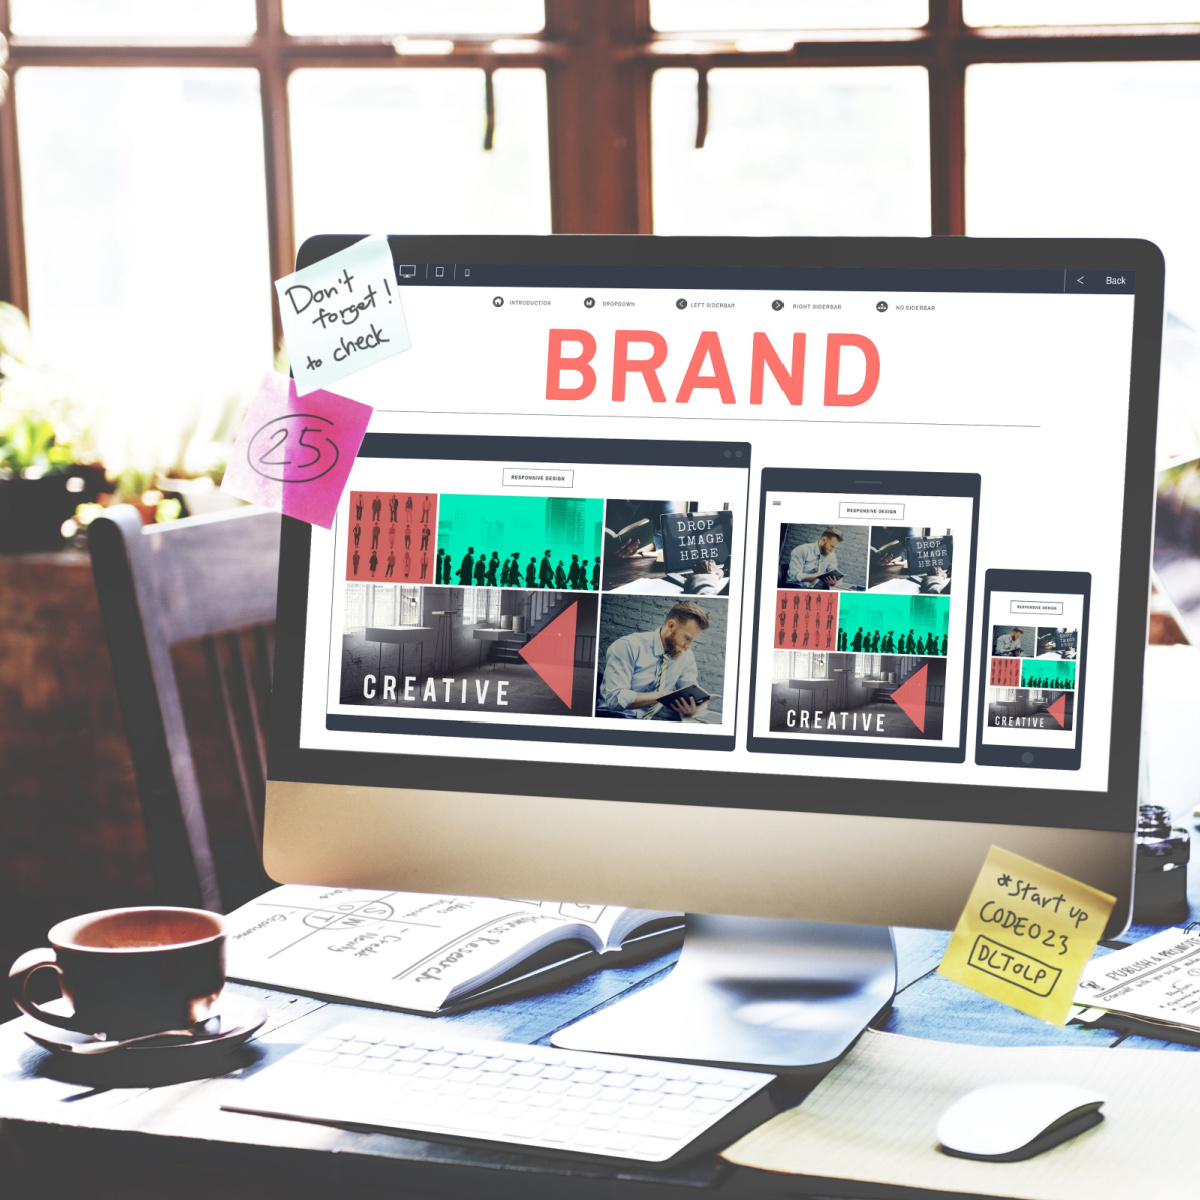 A branded website is a necessary potent tool for Houston digital marketing.